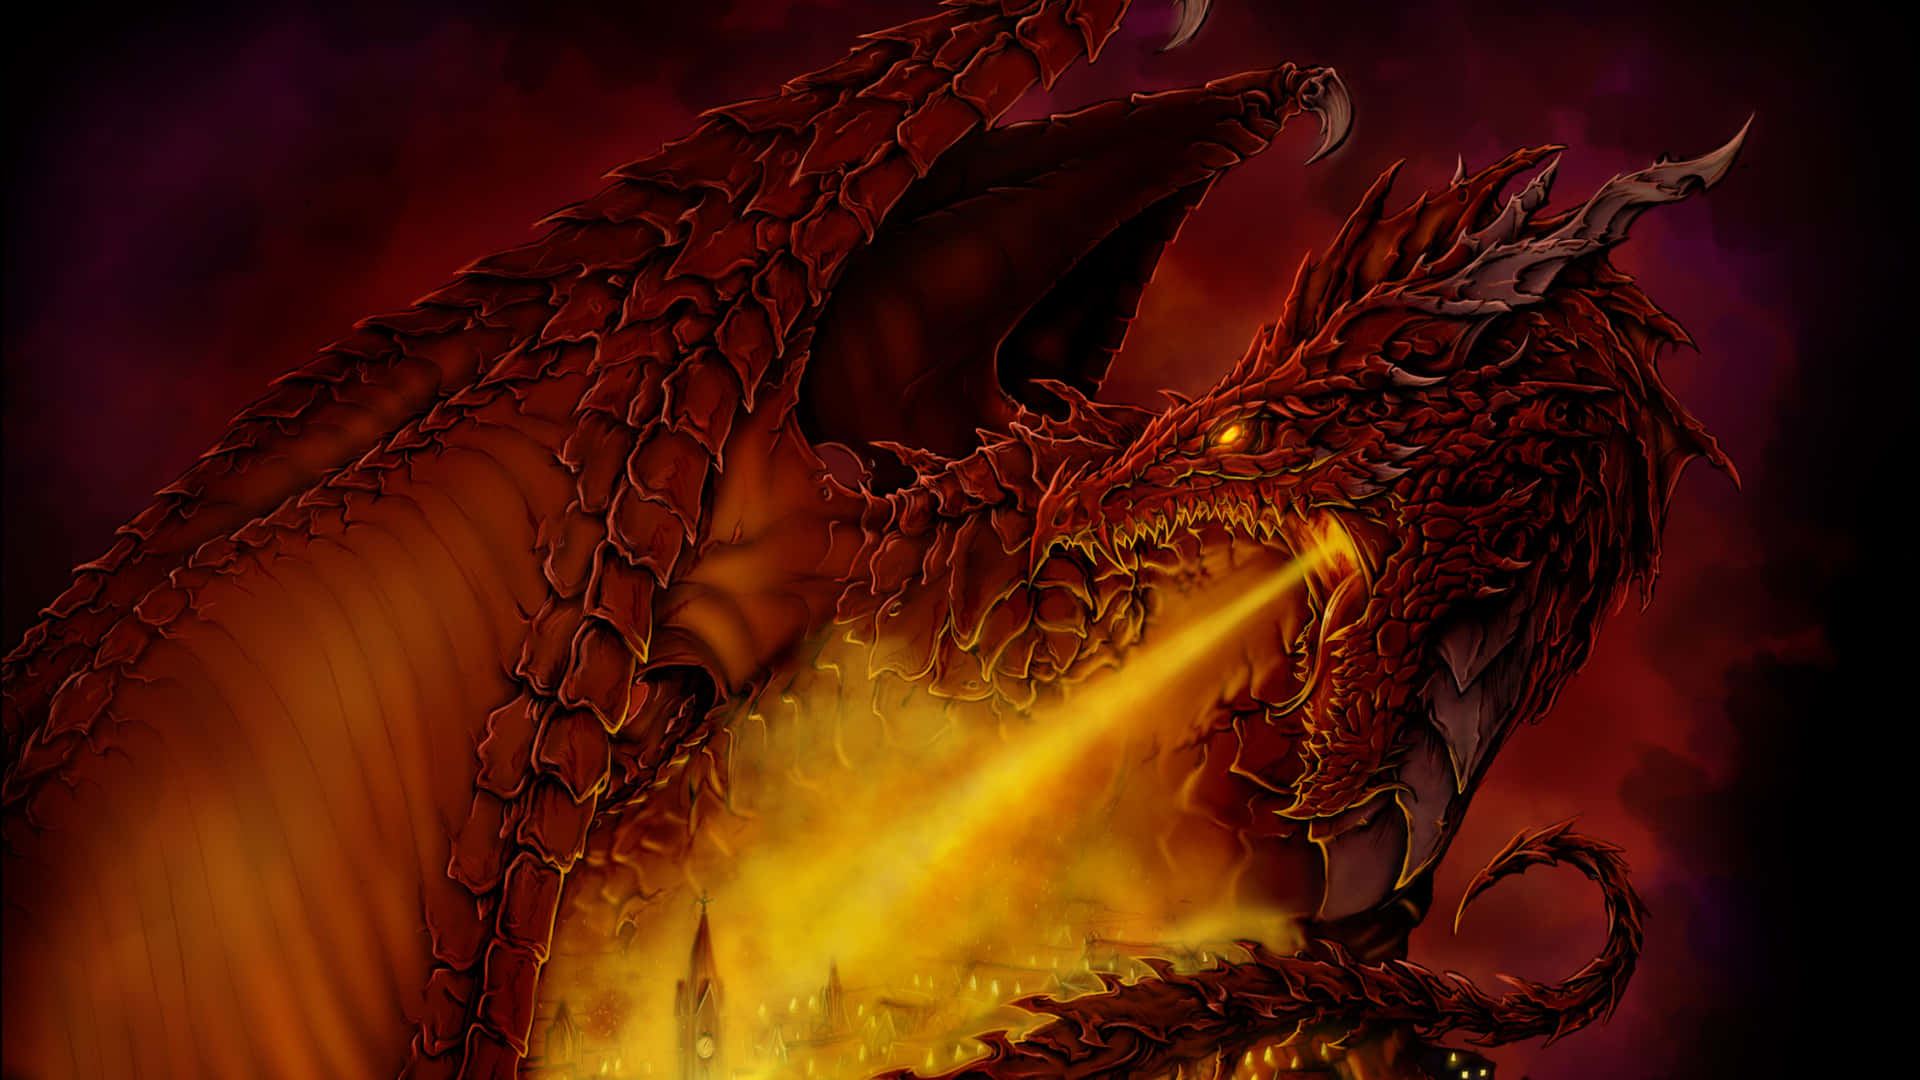 A Red Dragon With Flames Coming Out Of Its Mouth Wallpaper